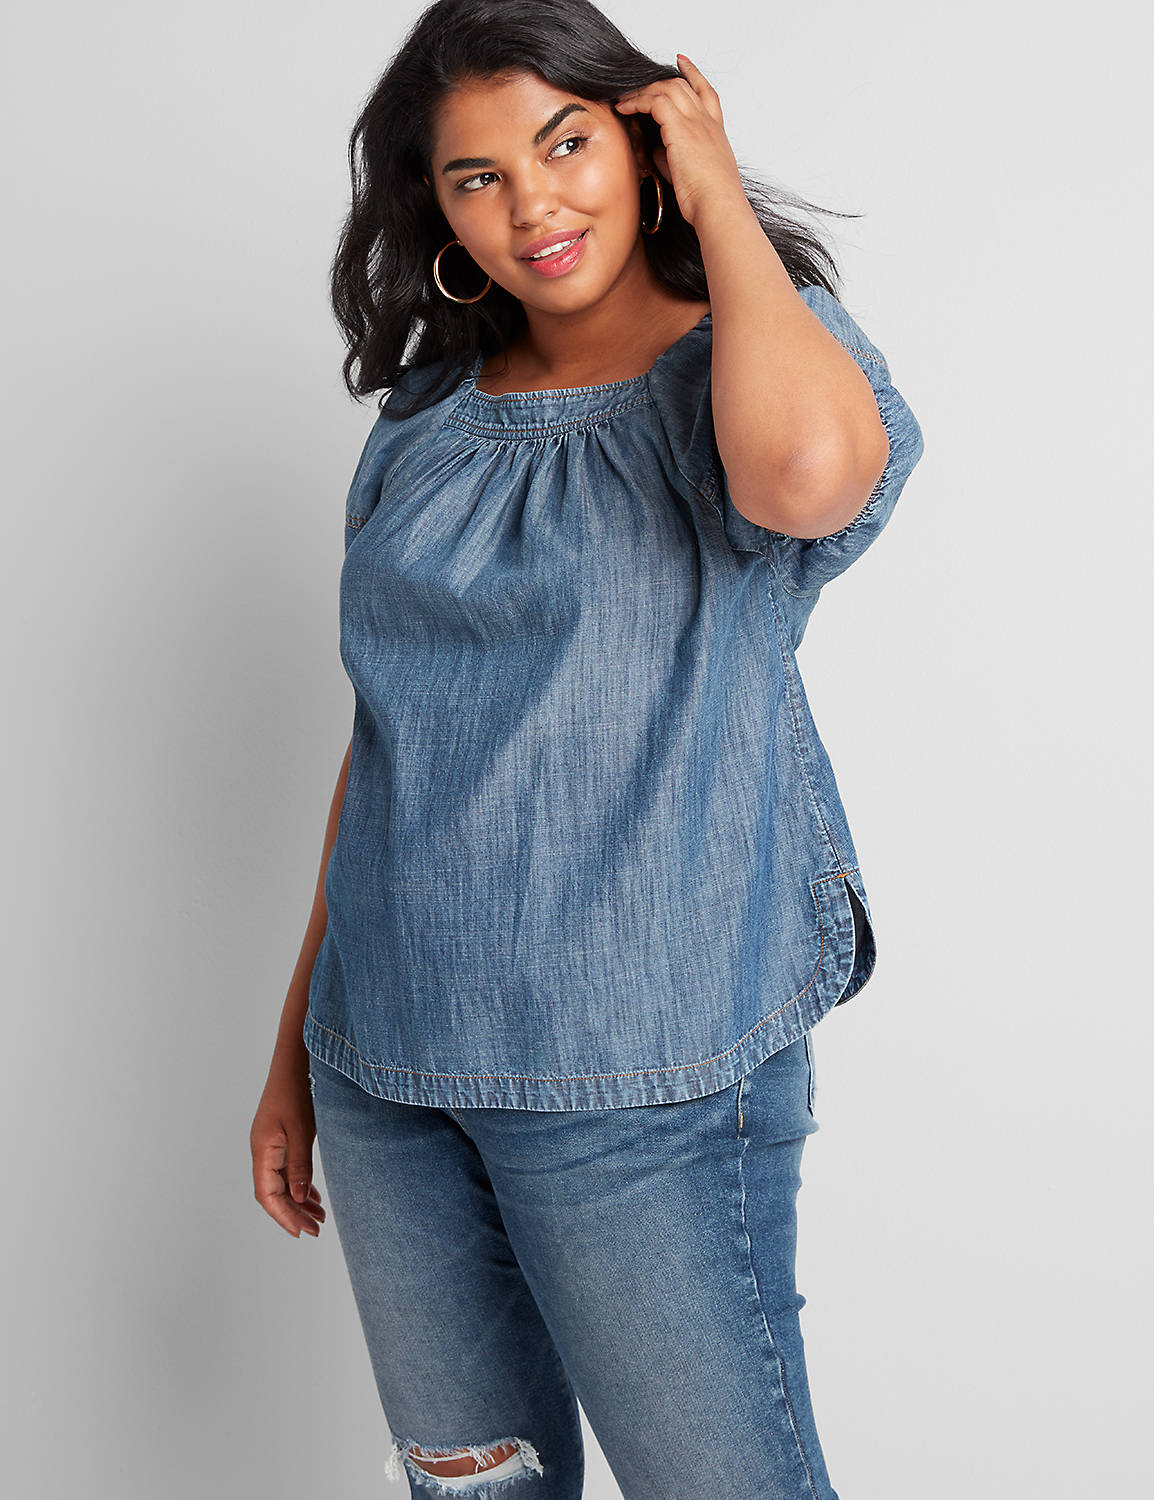 Short Sleeve Square Neck Popover Chambray Top 1114556:Denim Chambray:12 Product Image 1